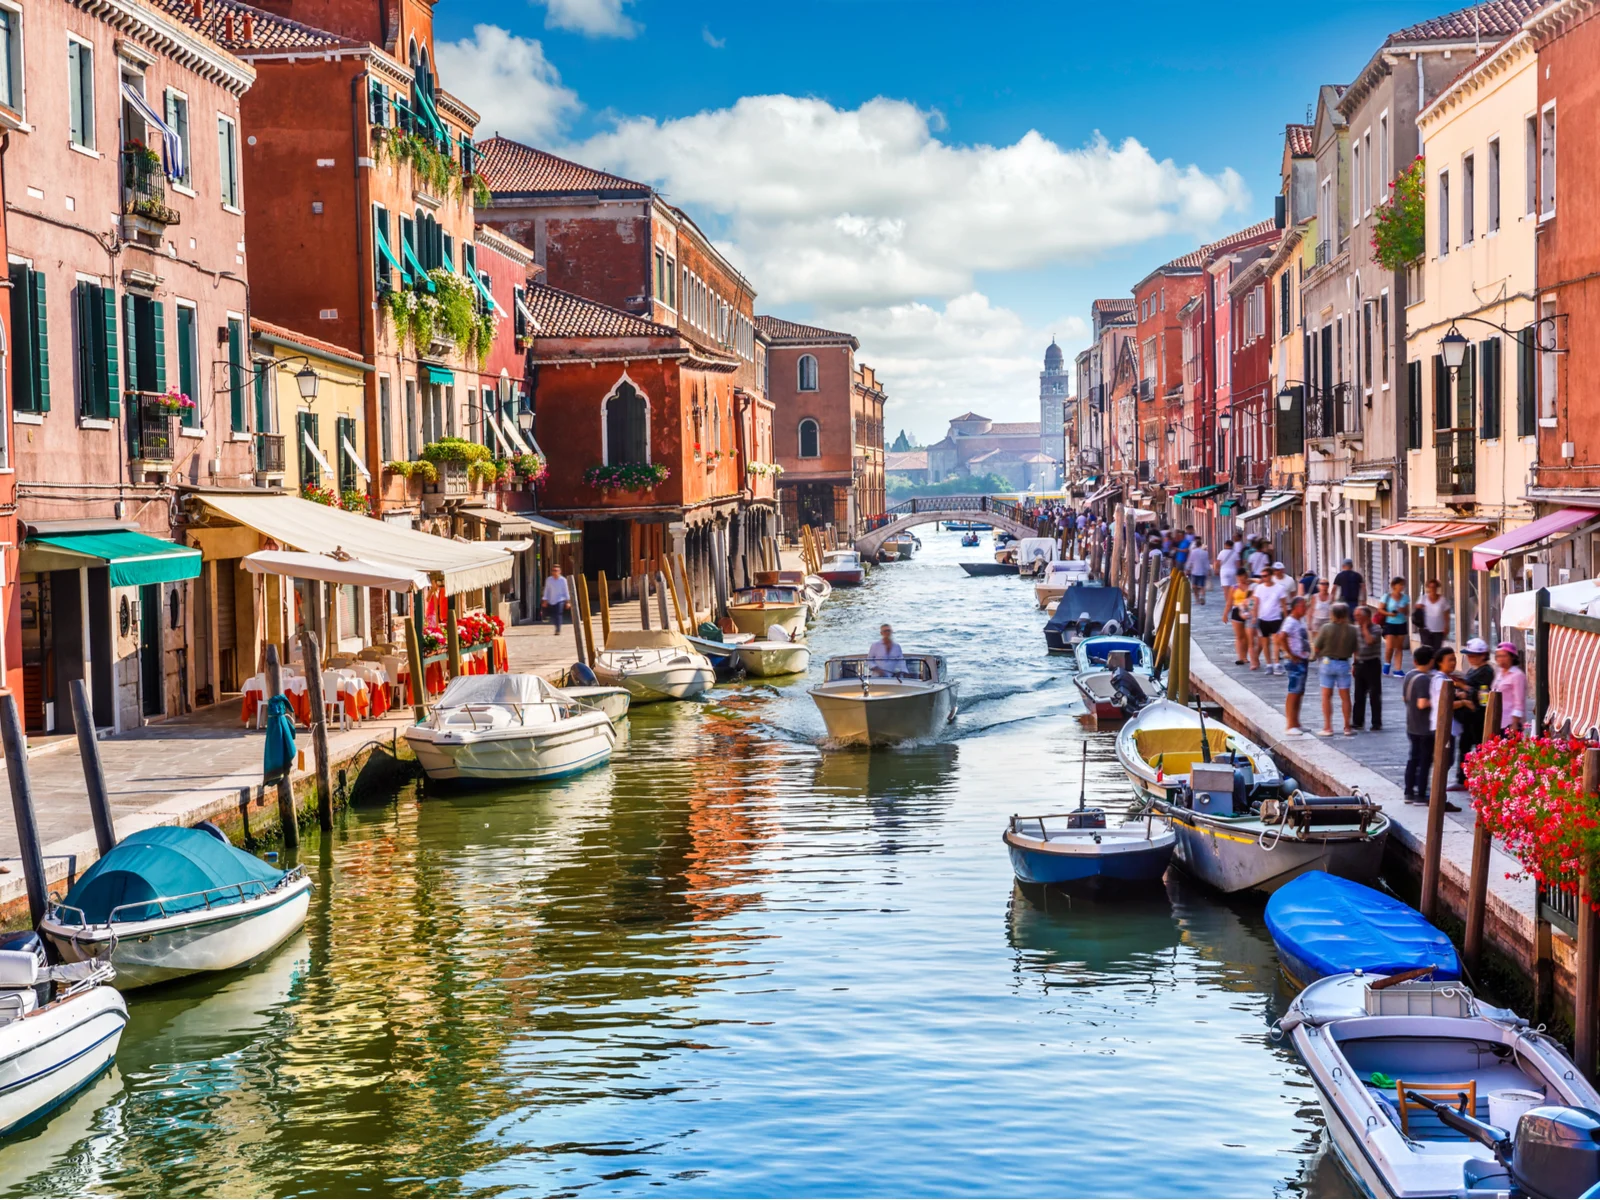 Island of Murano in Venice, pictured during the best time to visit Italy